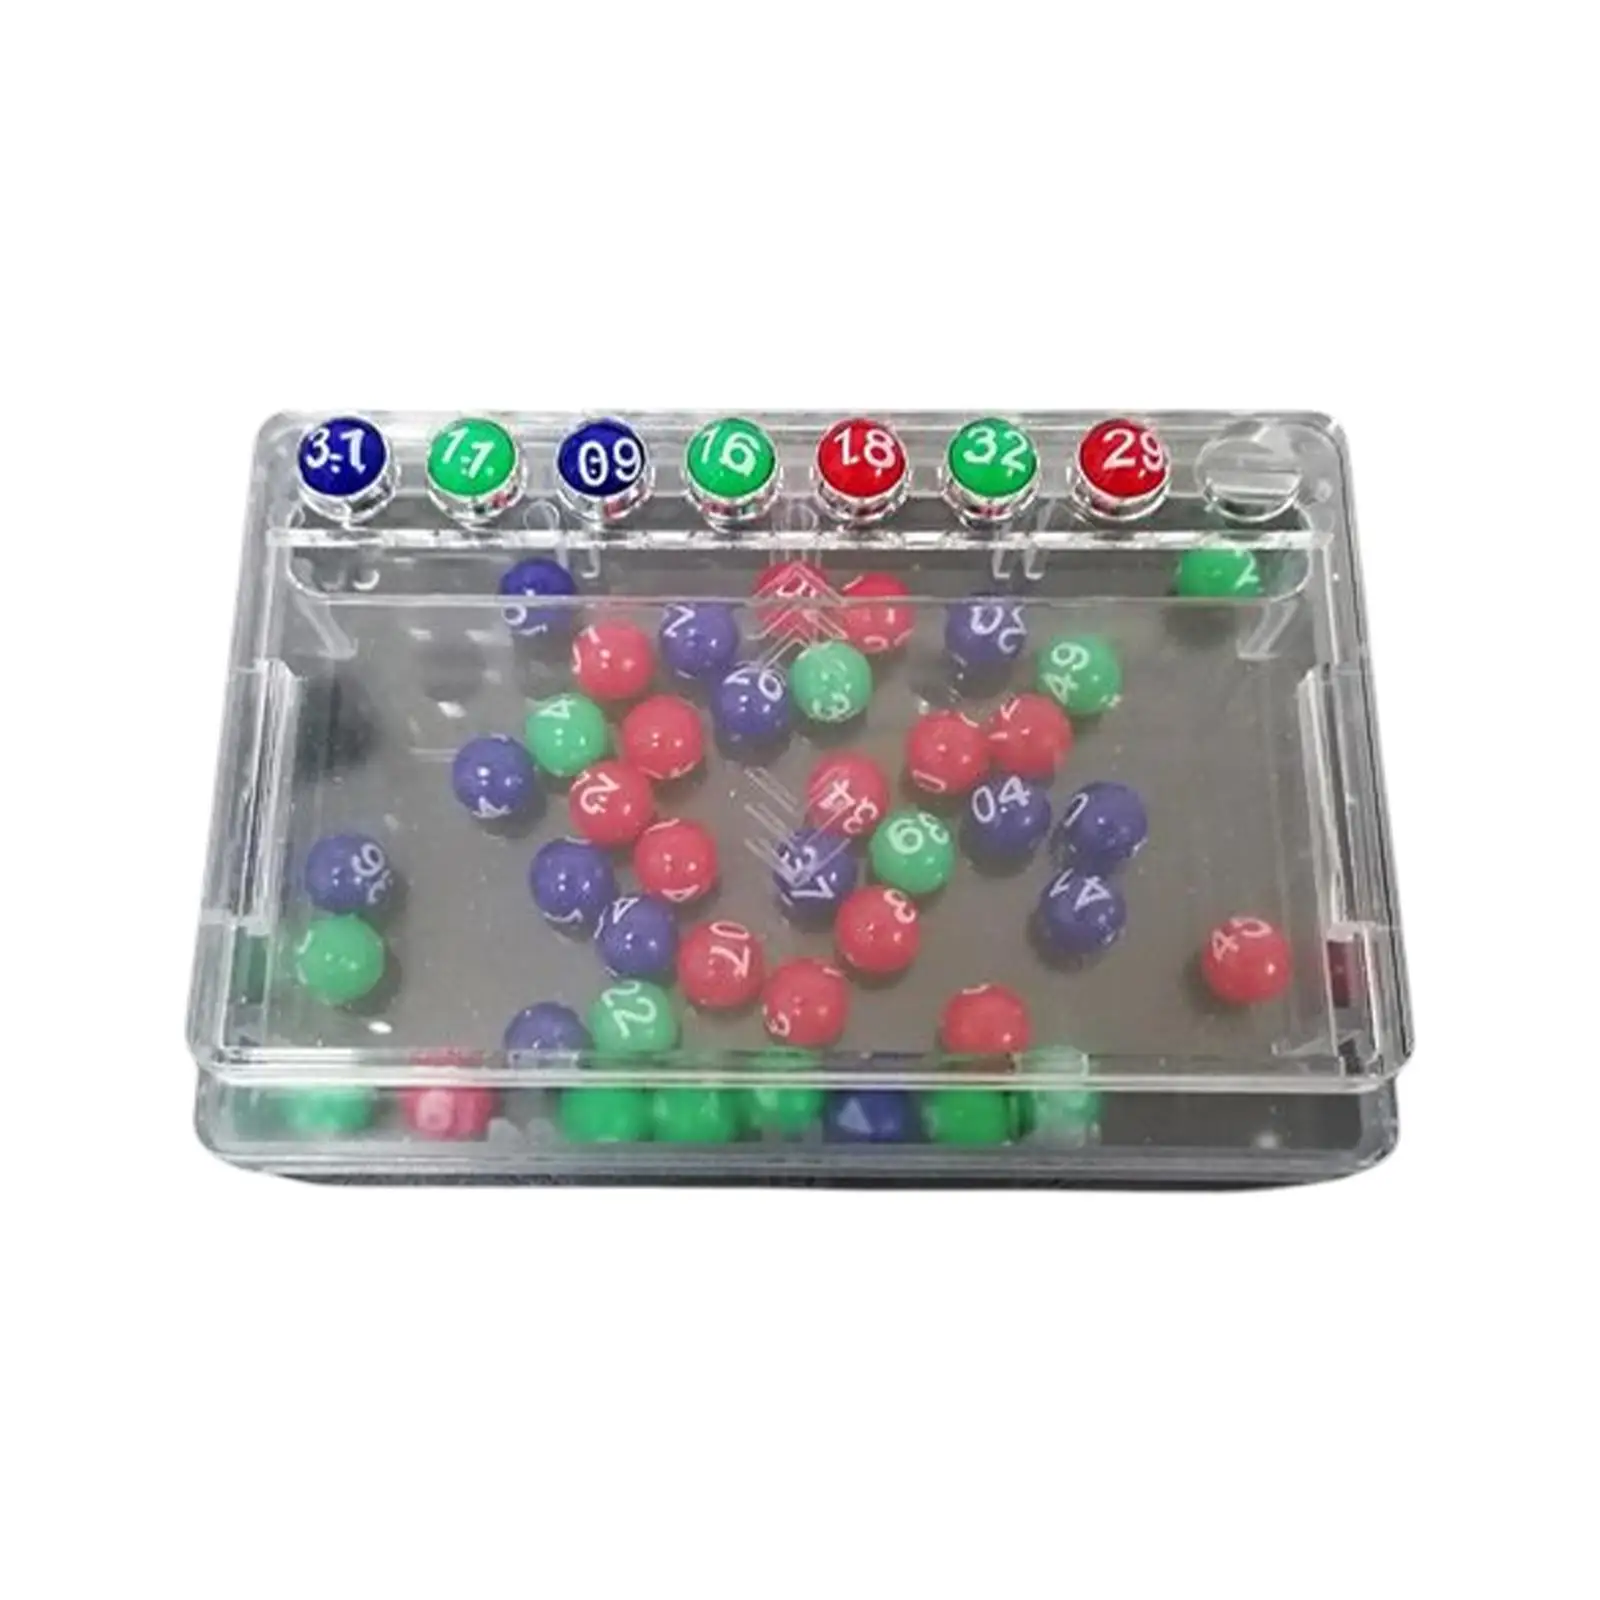 Mini Lottery Machine Number Picking Machine Draw Game 8mm Little Number Balls